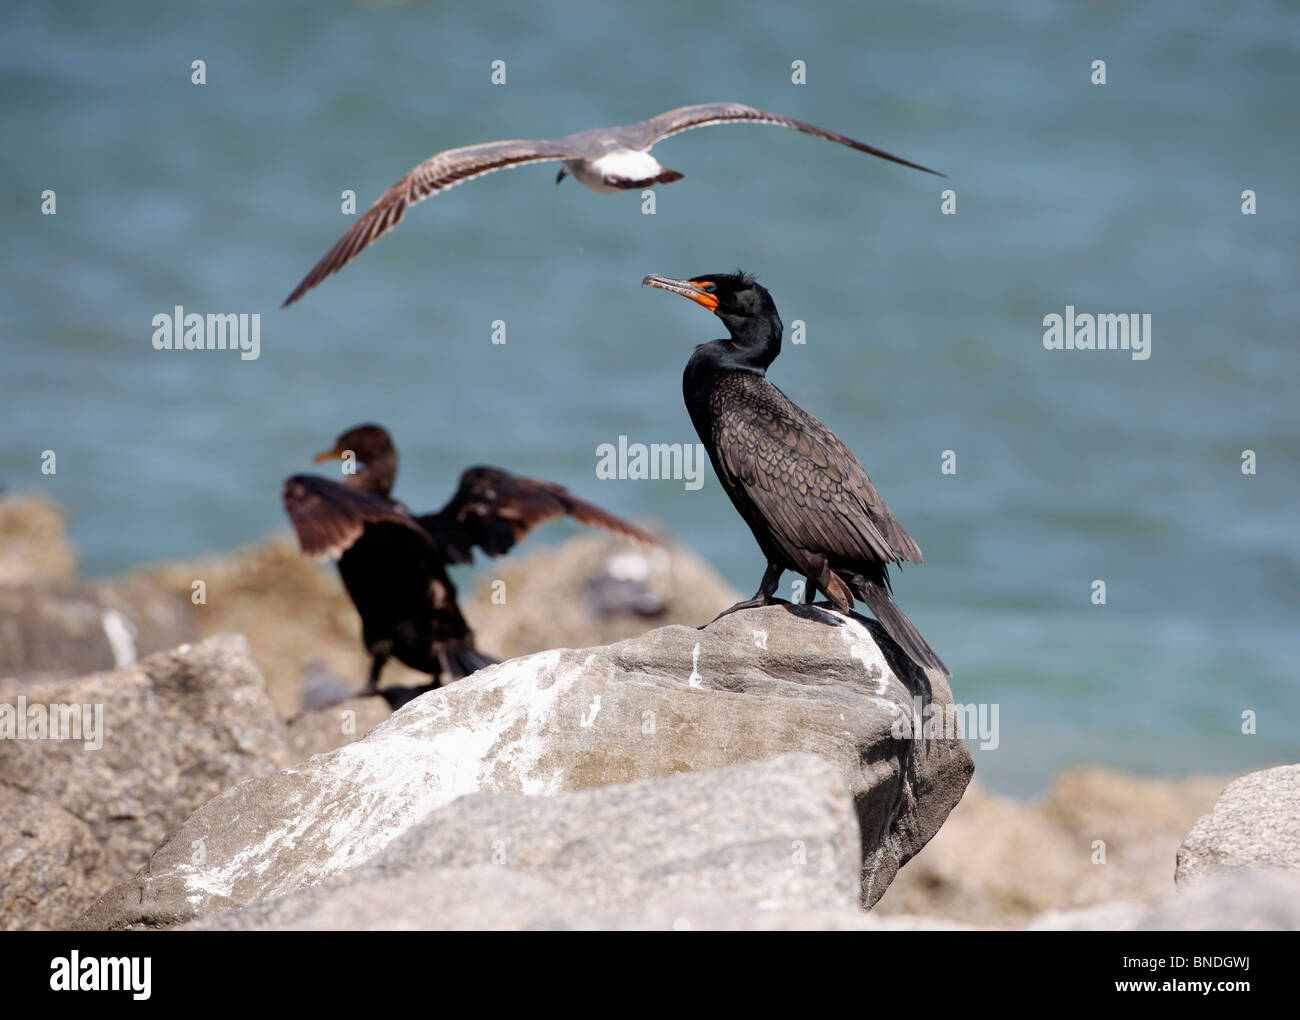 The Double-crested Cormorant Florida sunning Stock Photo